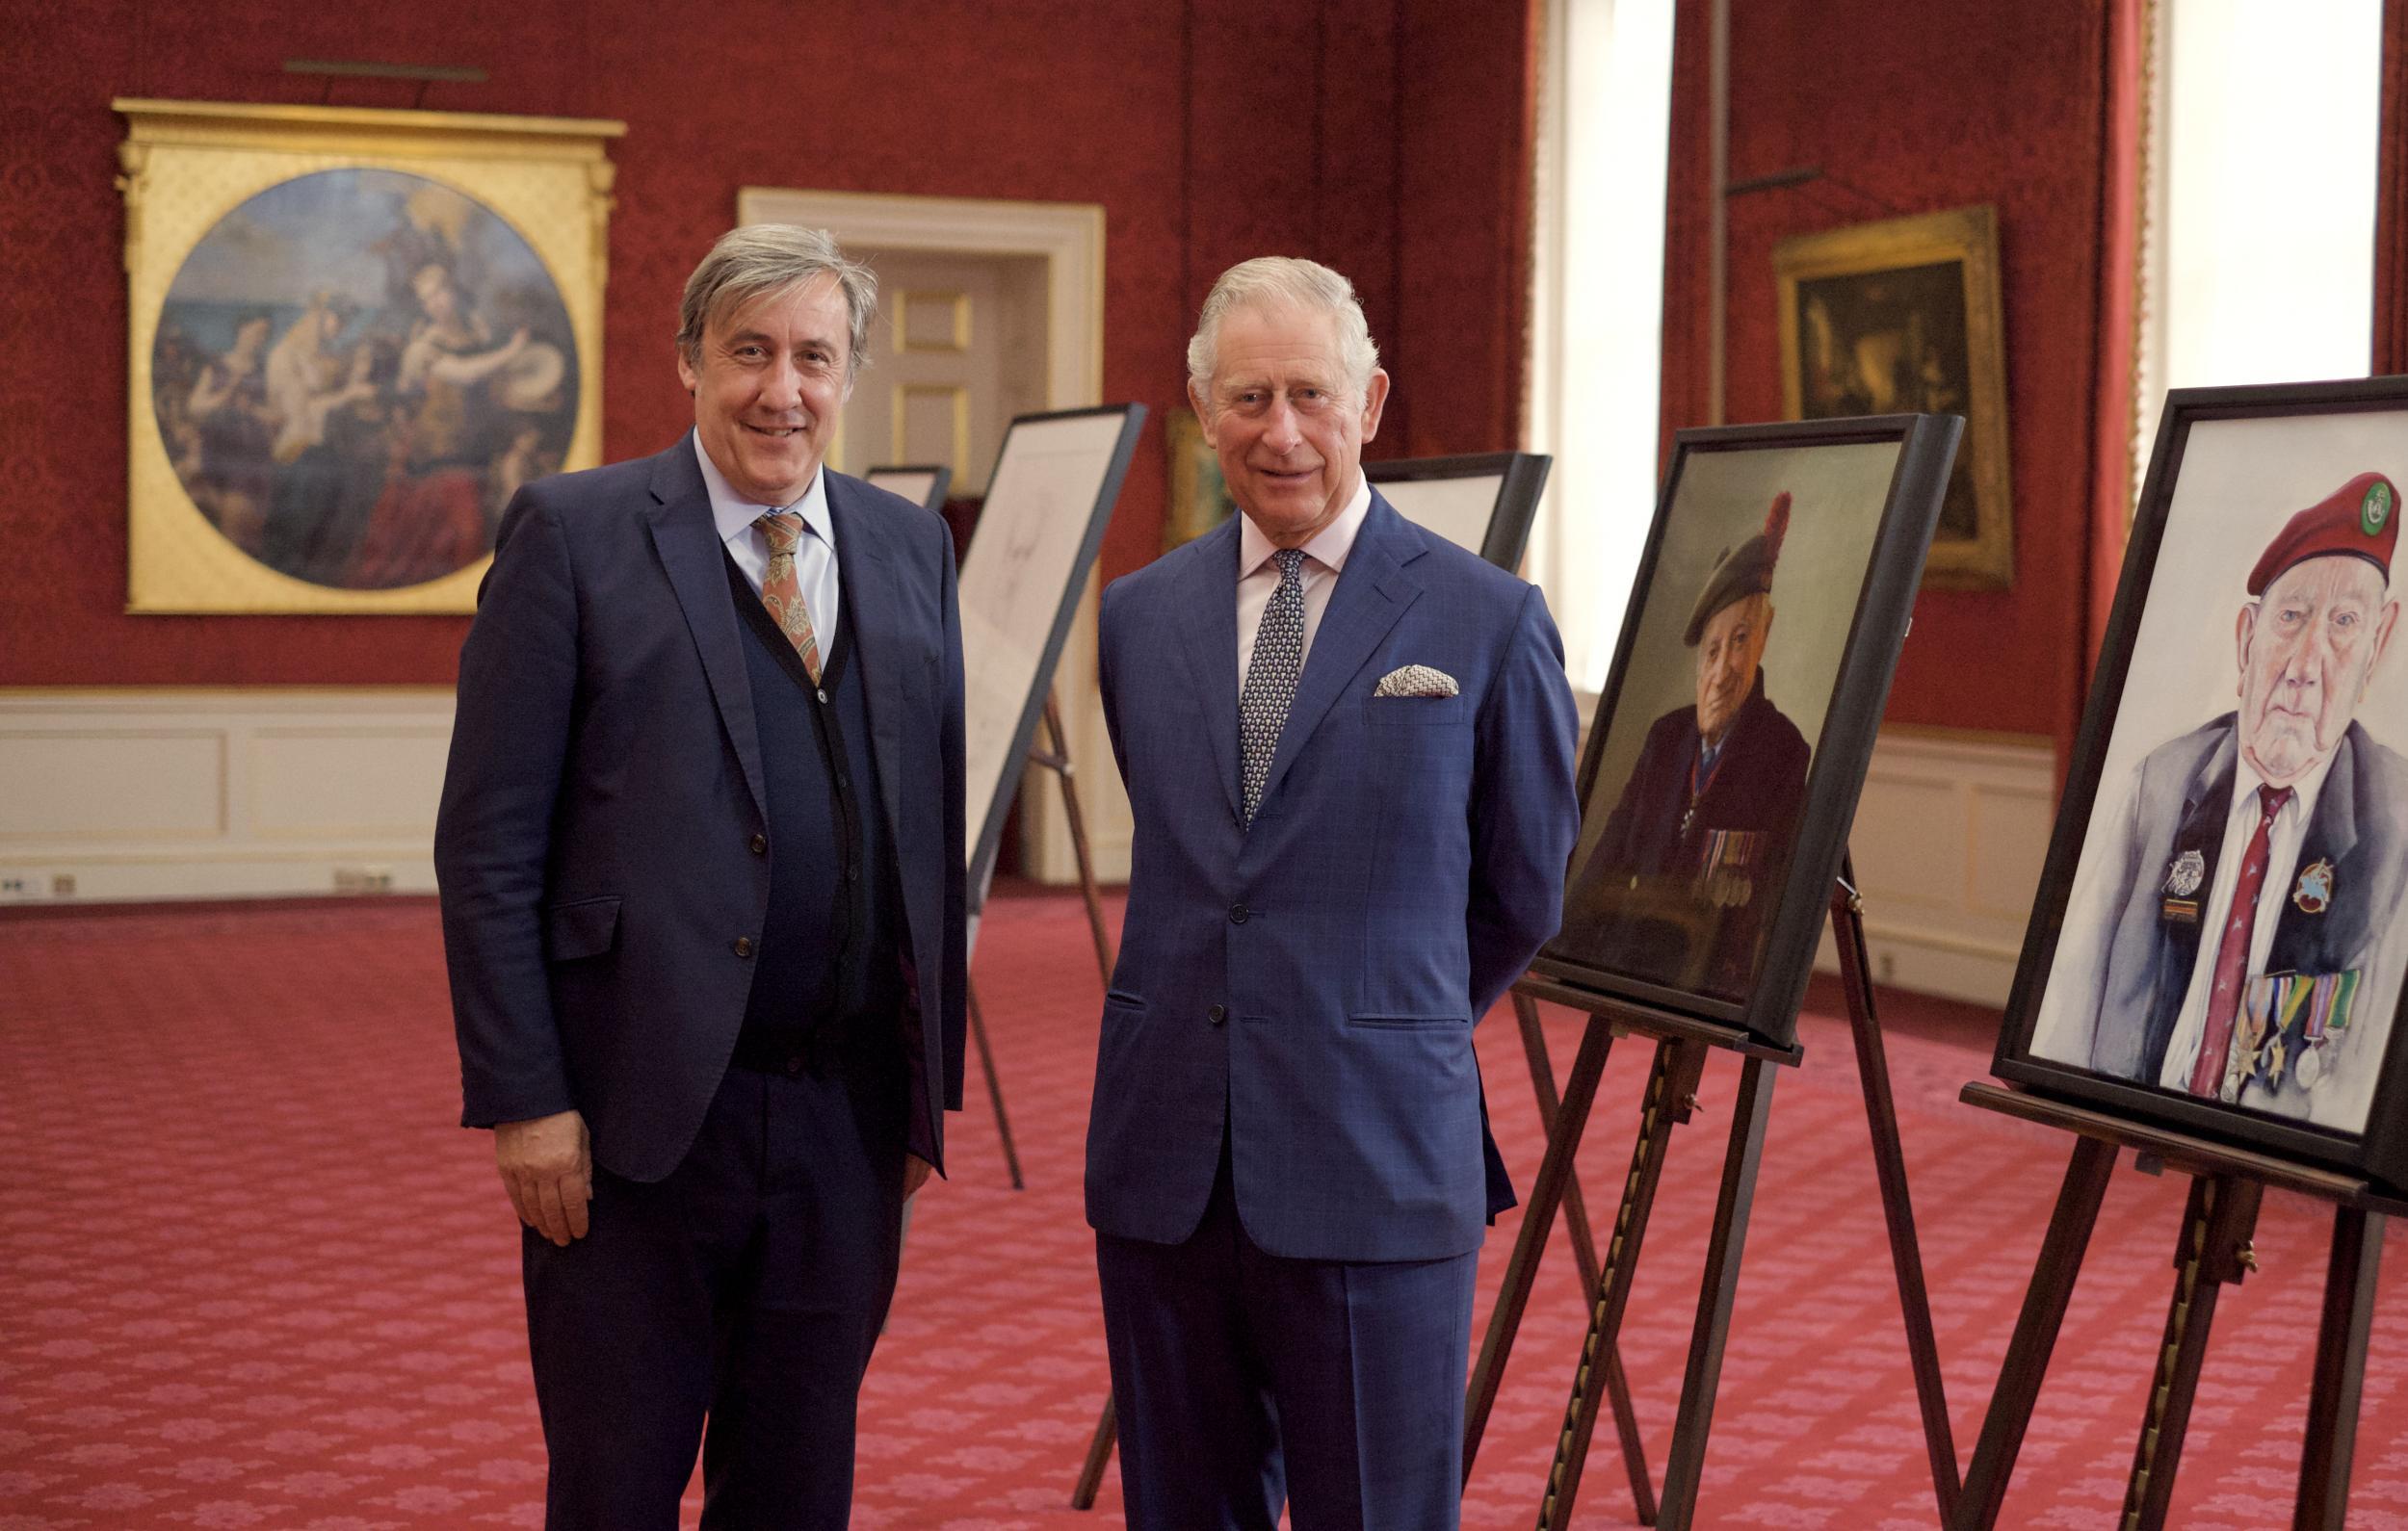 Andrew Graham-Dixon and the future King Charles III